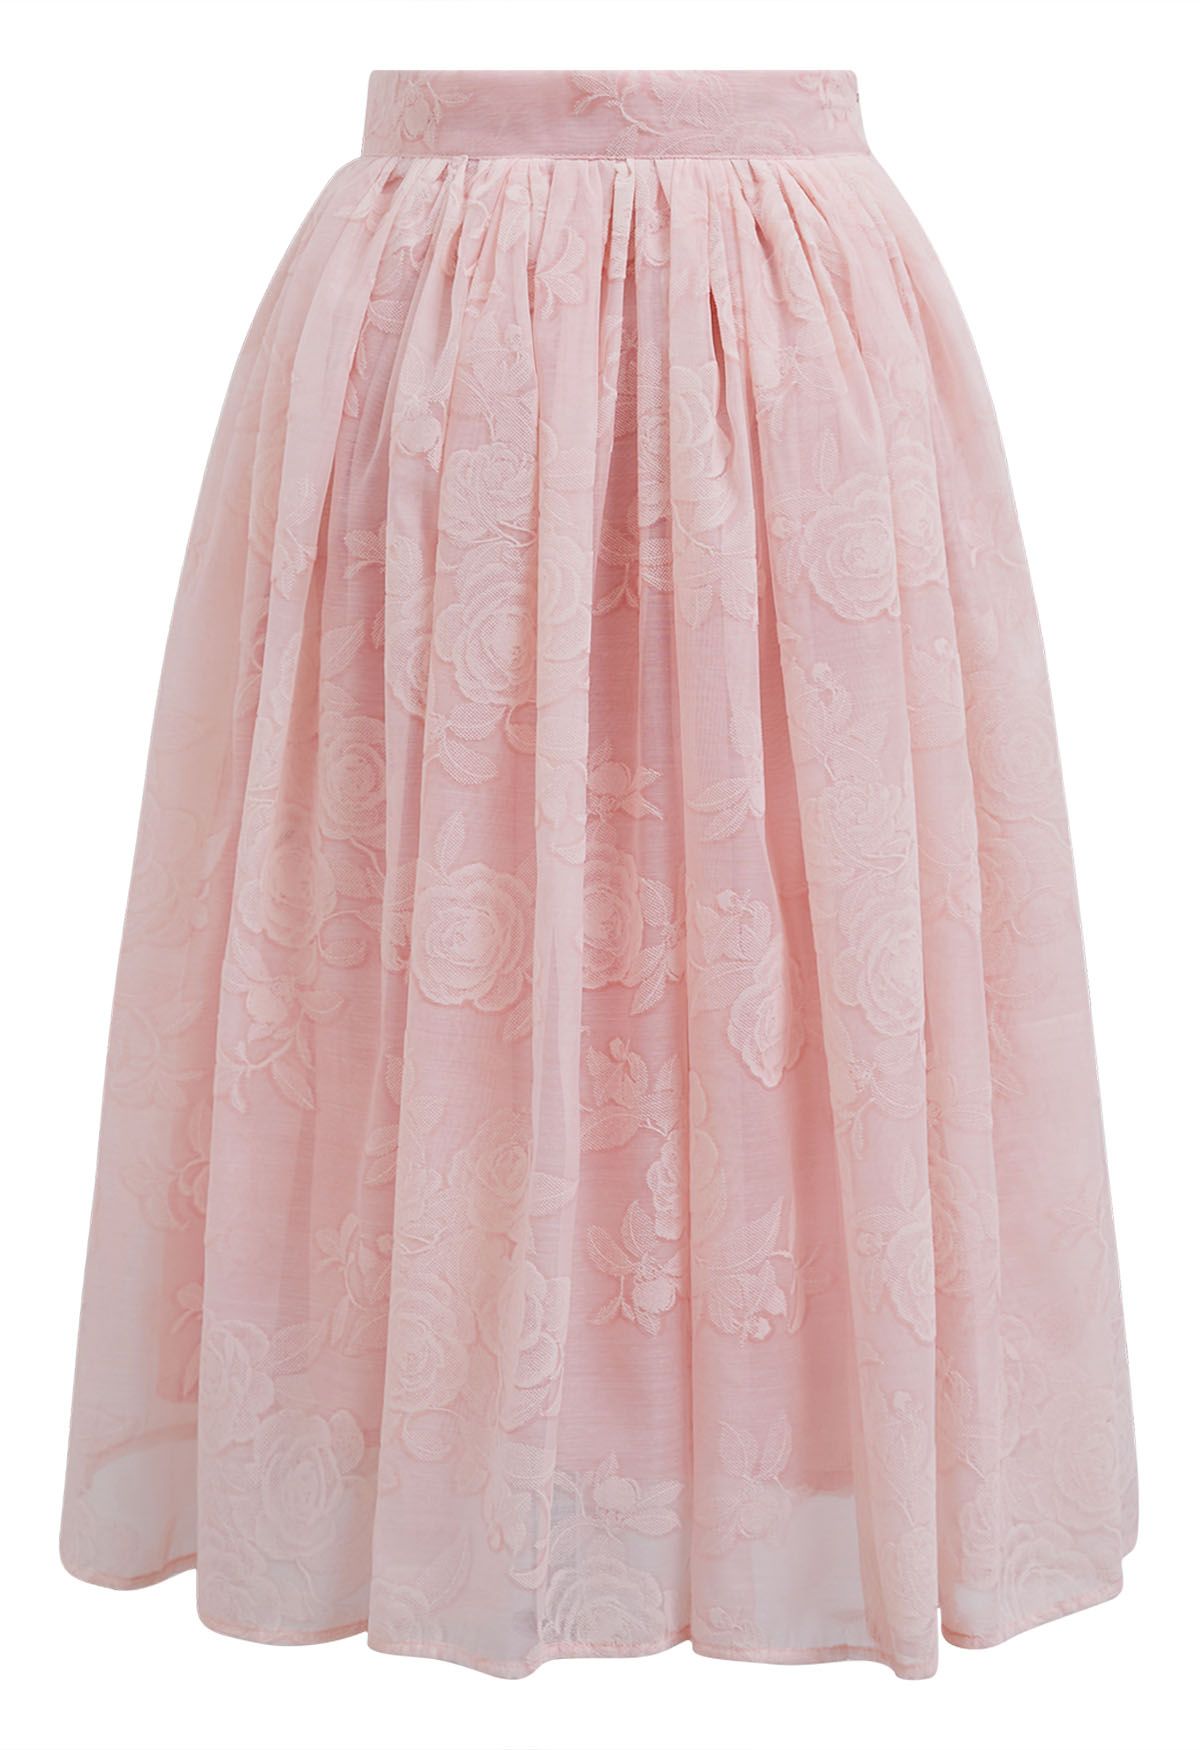 Velvet Rose Texture Organza Midi Skirt in Pink - Retro, Indie and ...